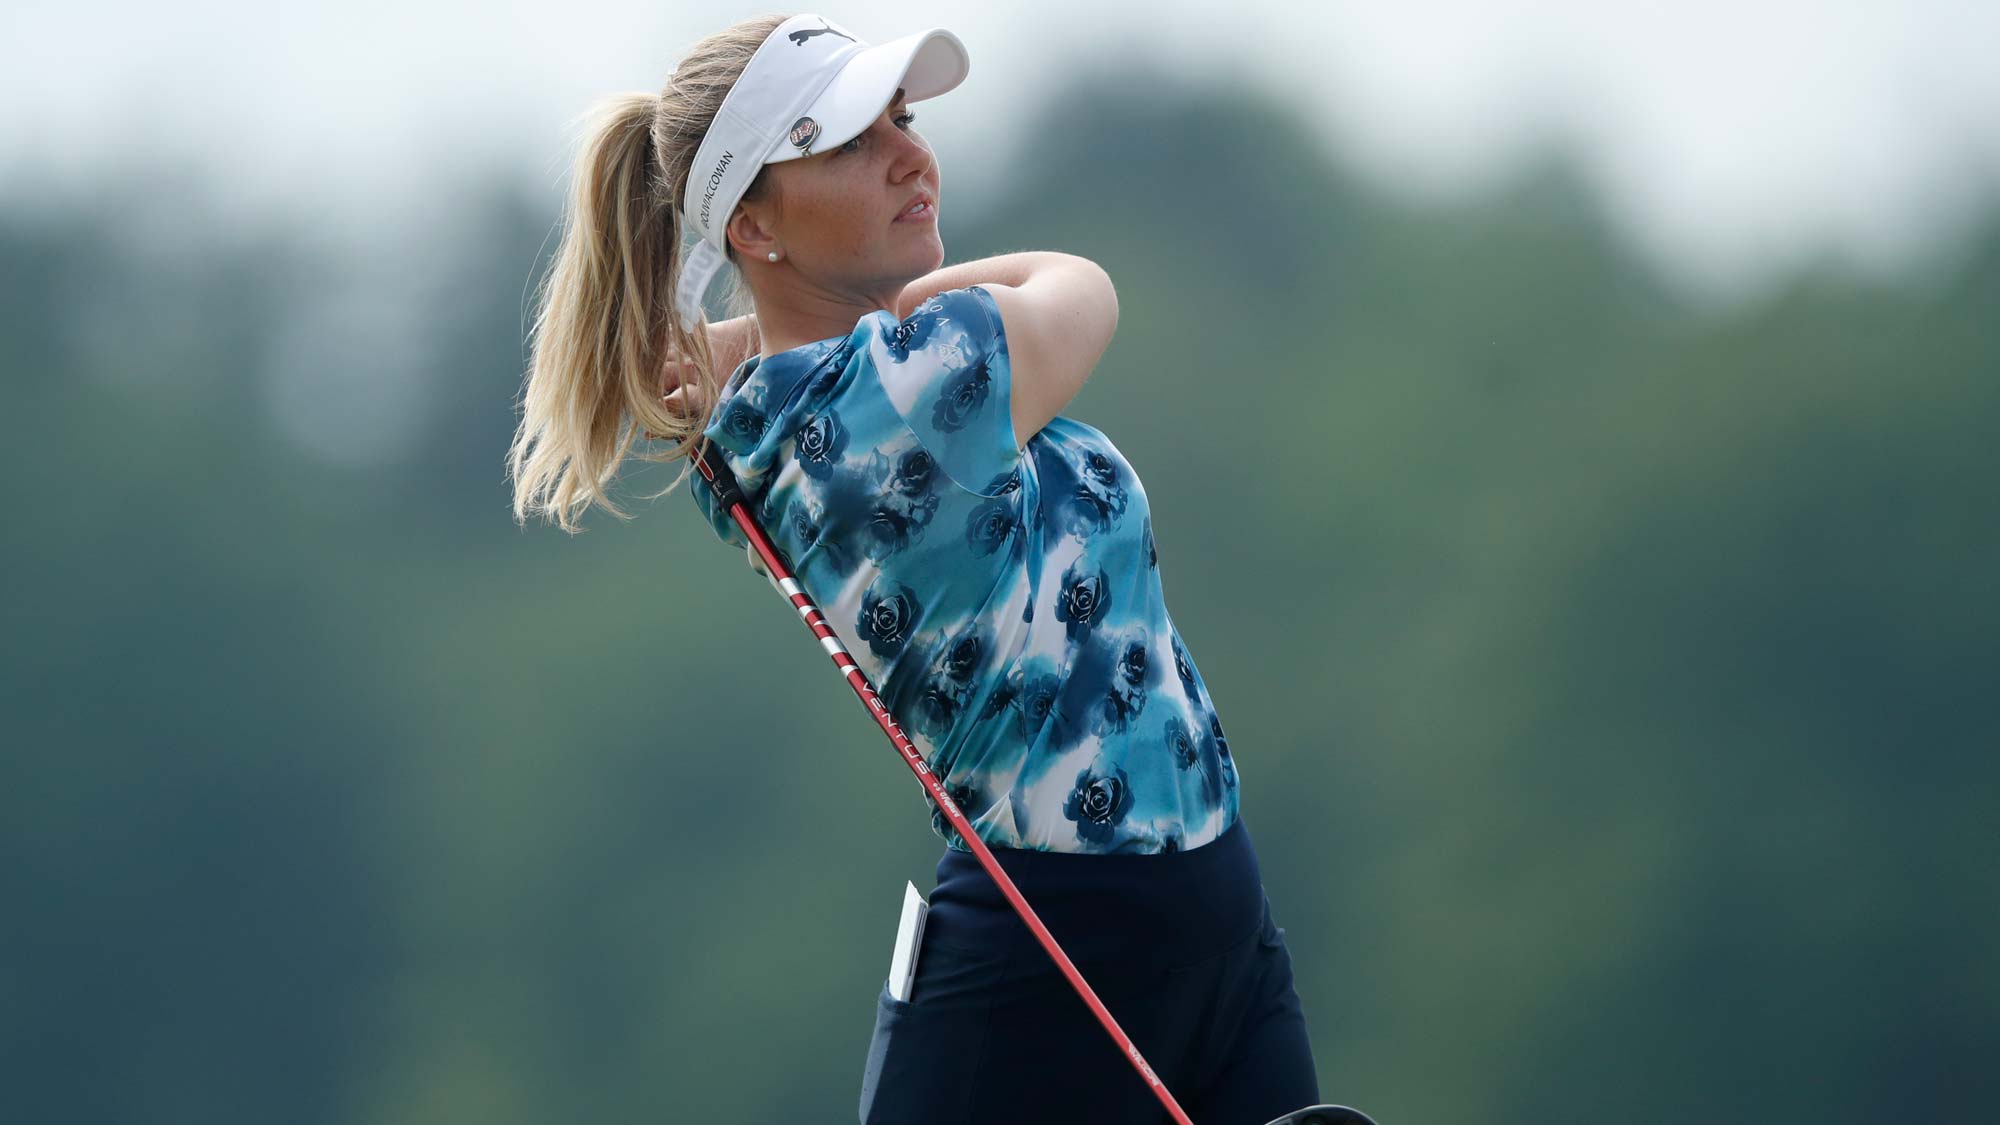 Olivia Cowan of Germany tees off on the 4th hole during the first round of The Scandinavian Mixed Hosted by Henrik and Annika